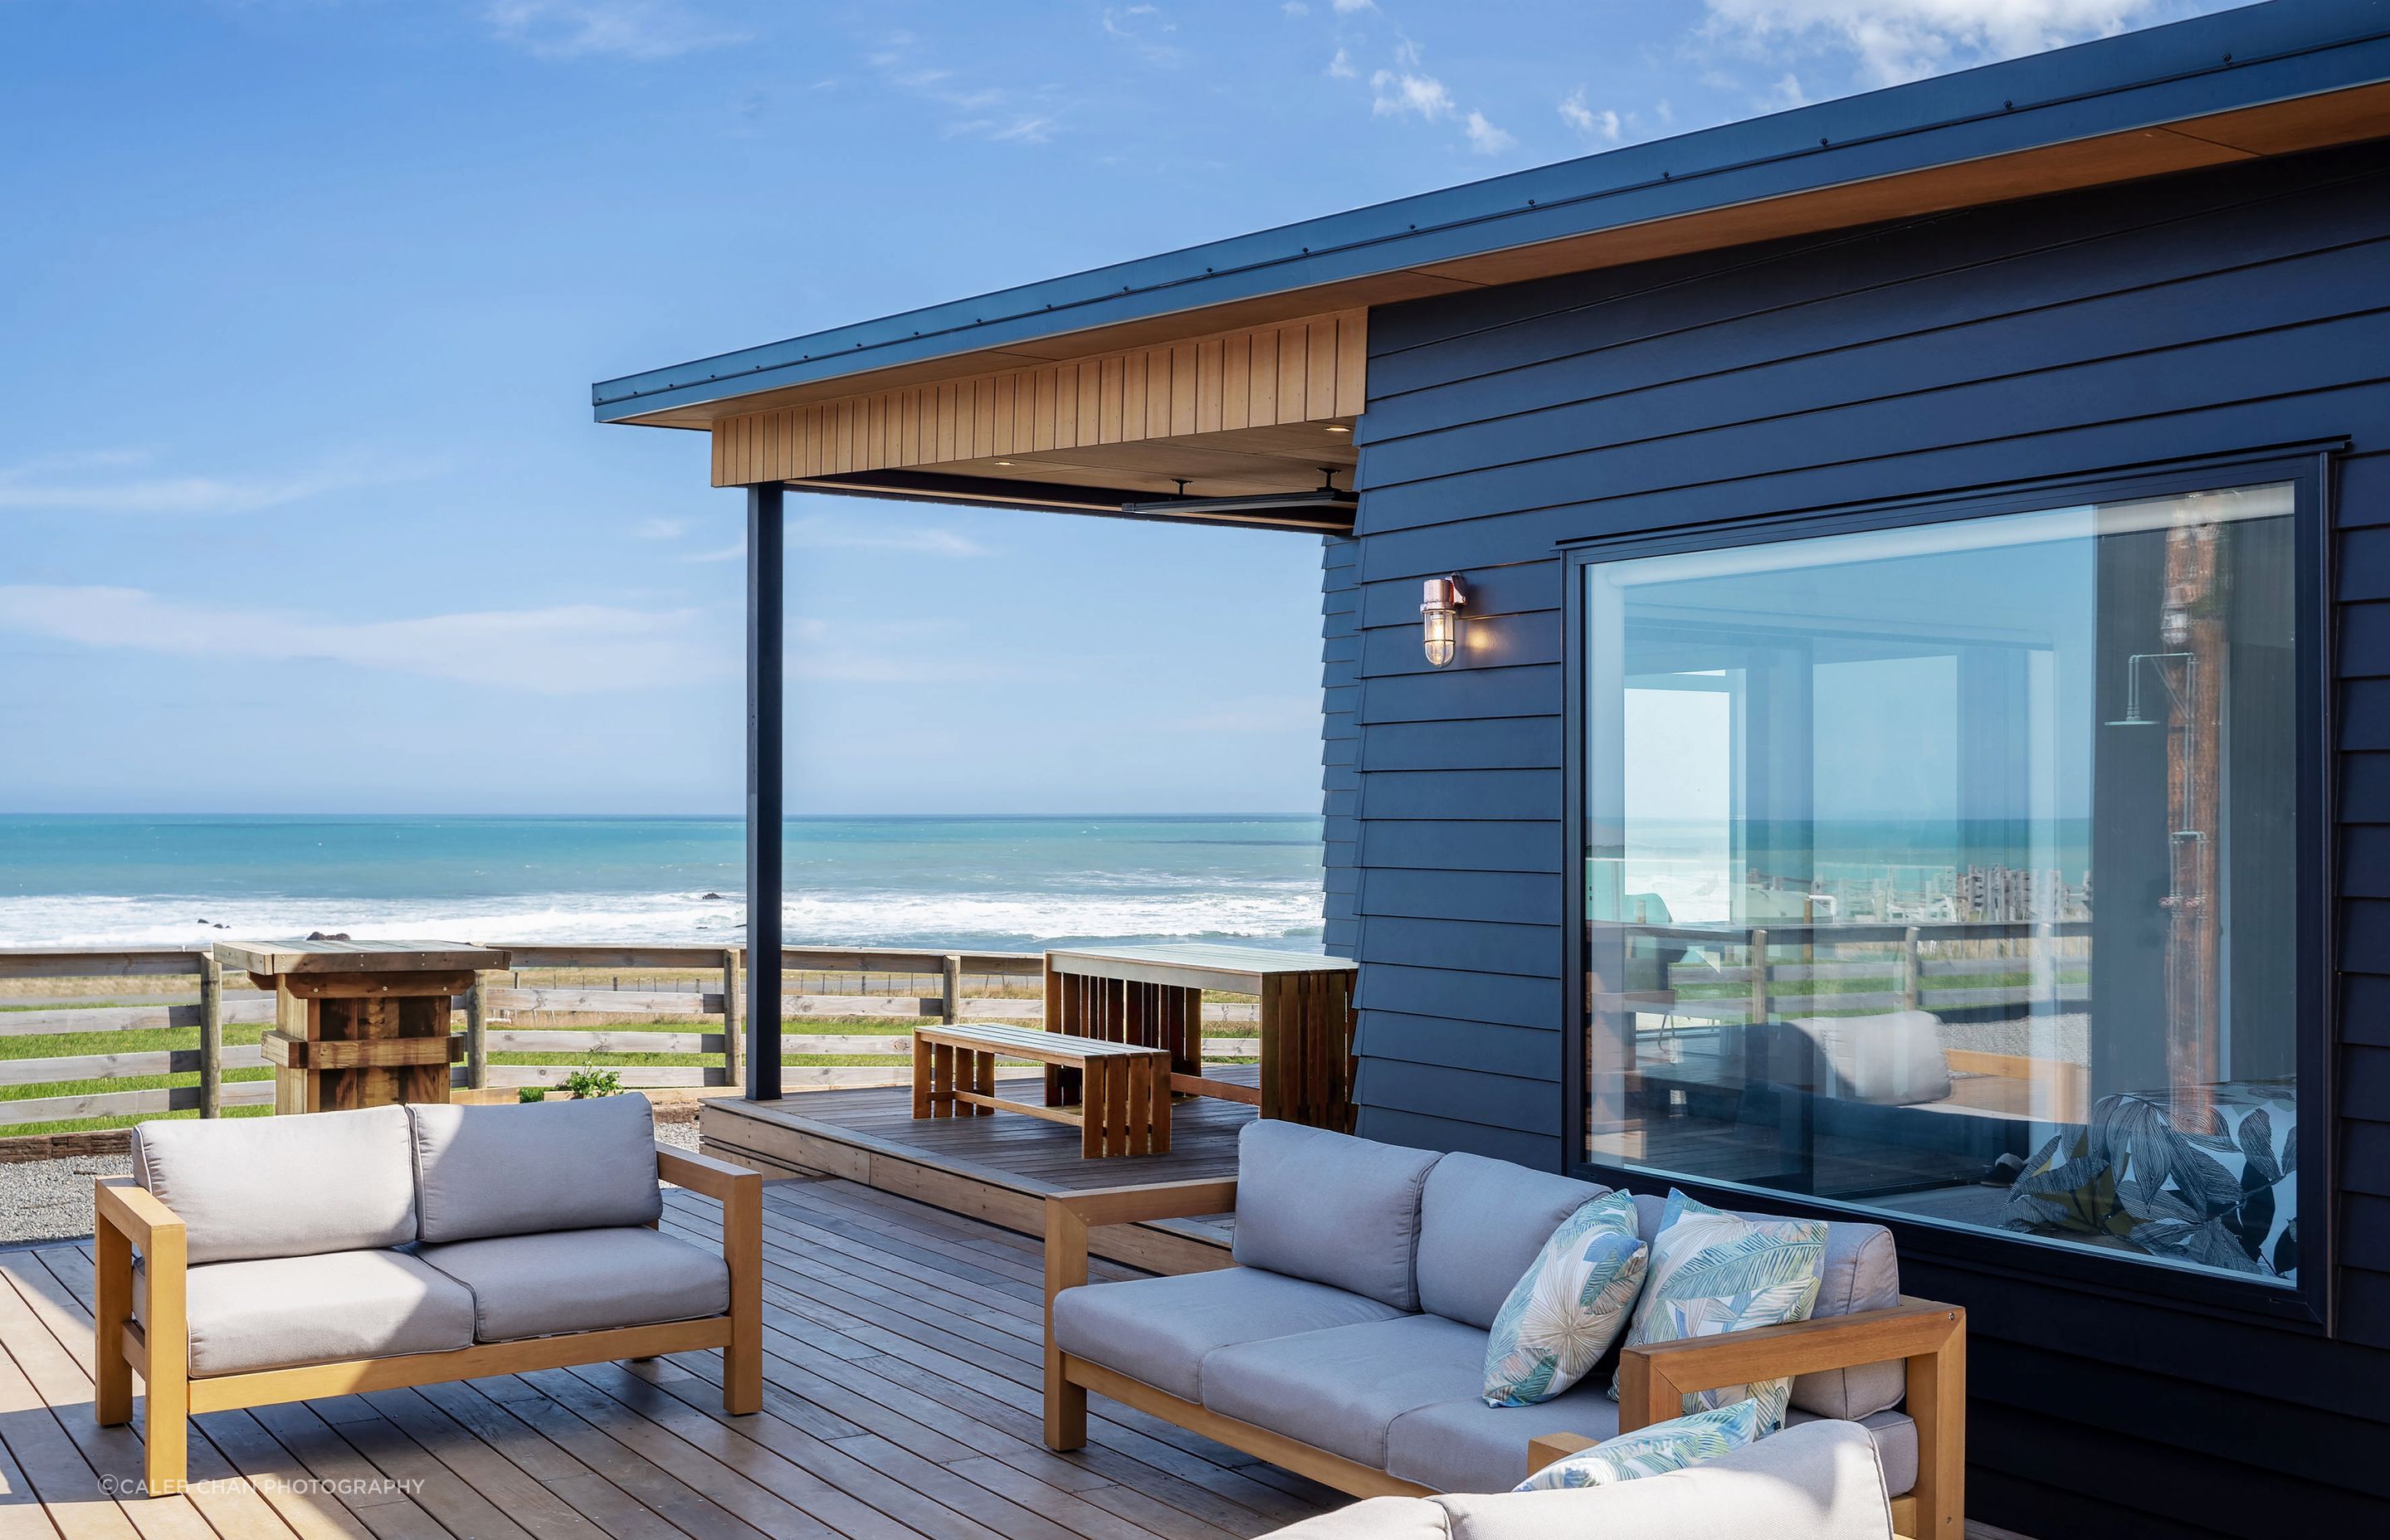 Sheltered outdoor living spaces ensure the sea air can be enjoyed even when the weather is less than favourable